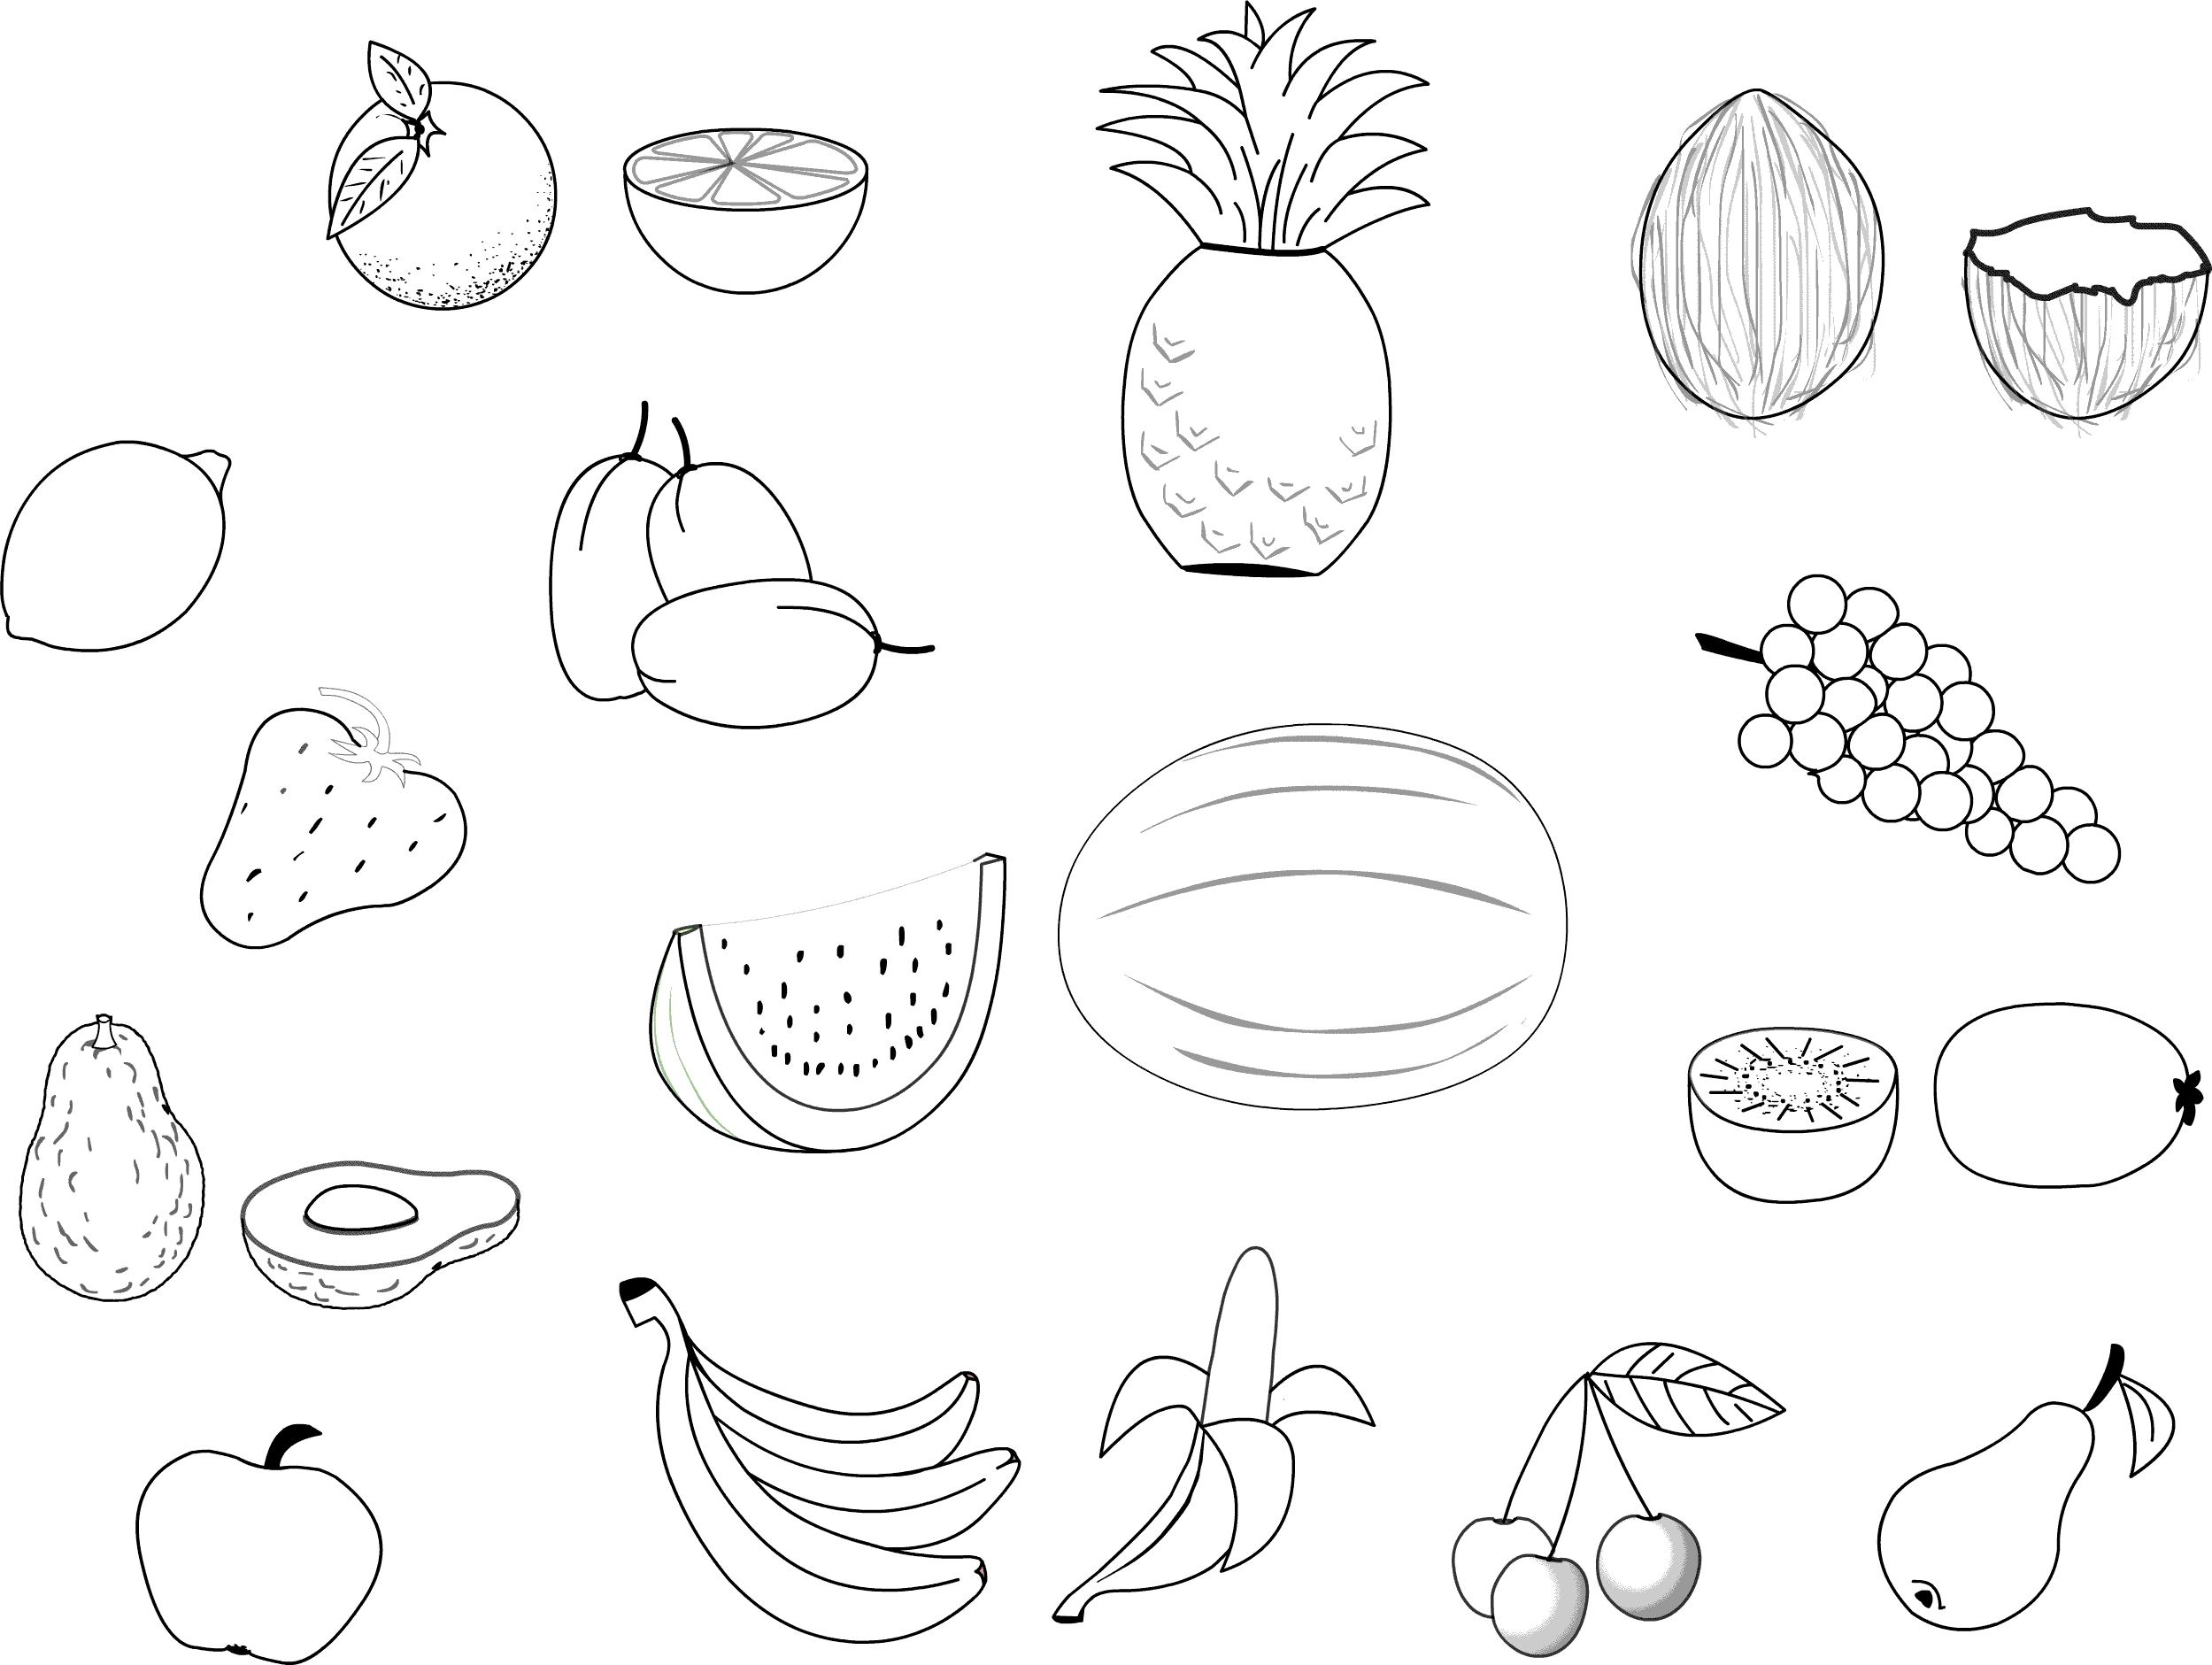 picture of fruits for colouring free printable fruit coloring pages for kids for picture colouring fruits of 